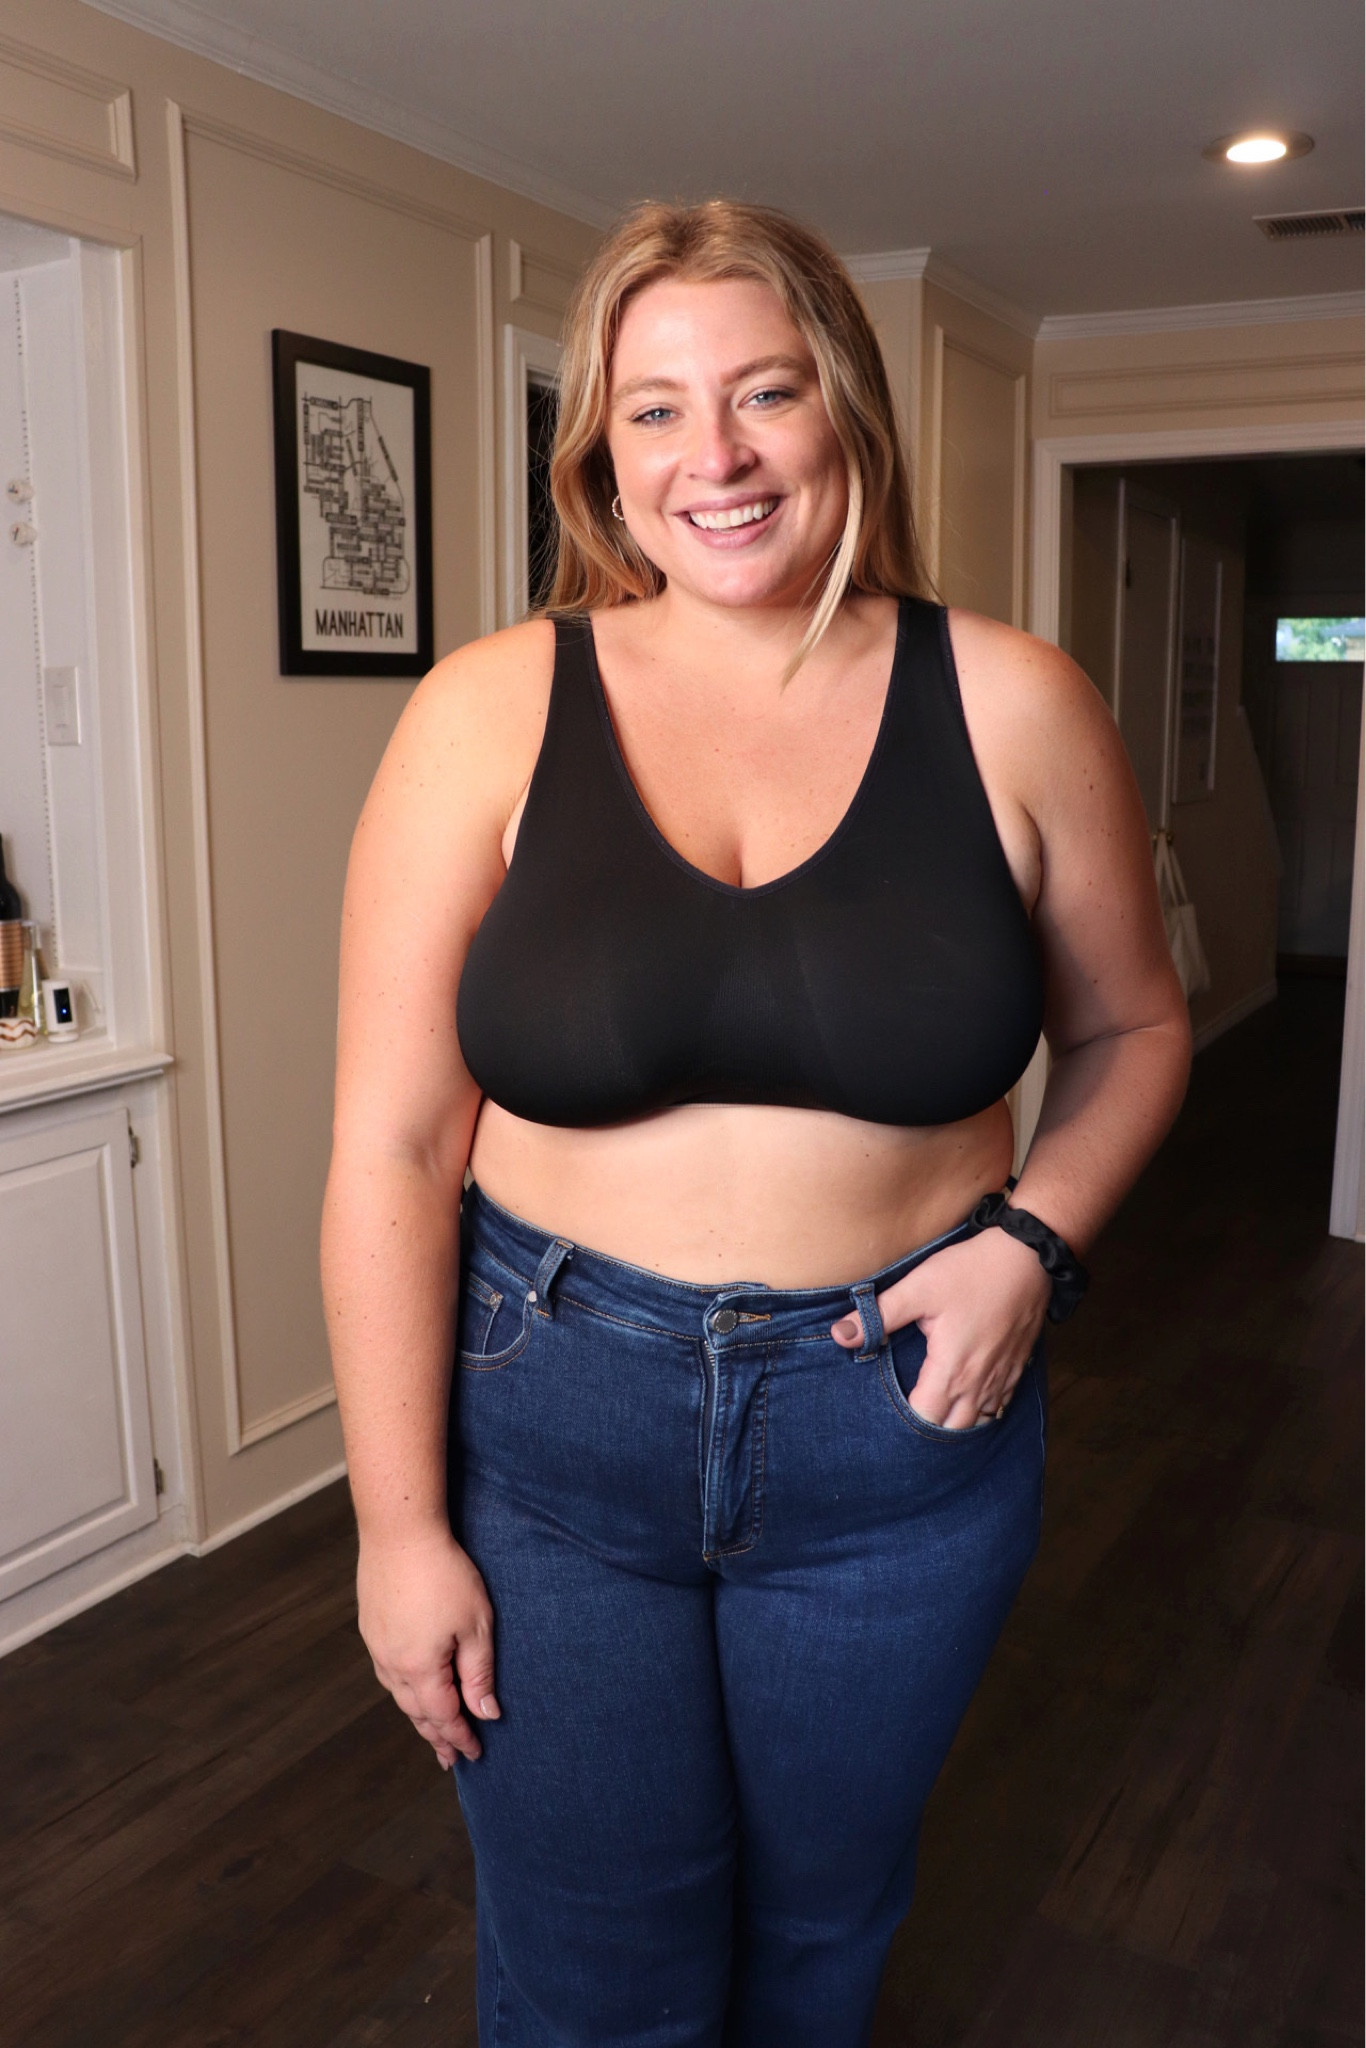 Breast of Both Worlds® Reversible … curated on LTK